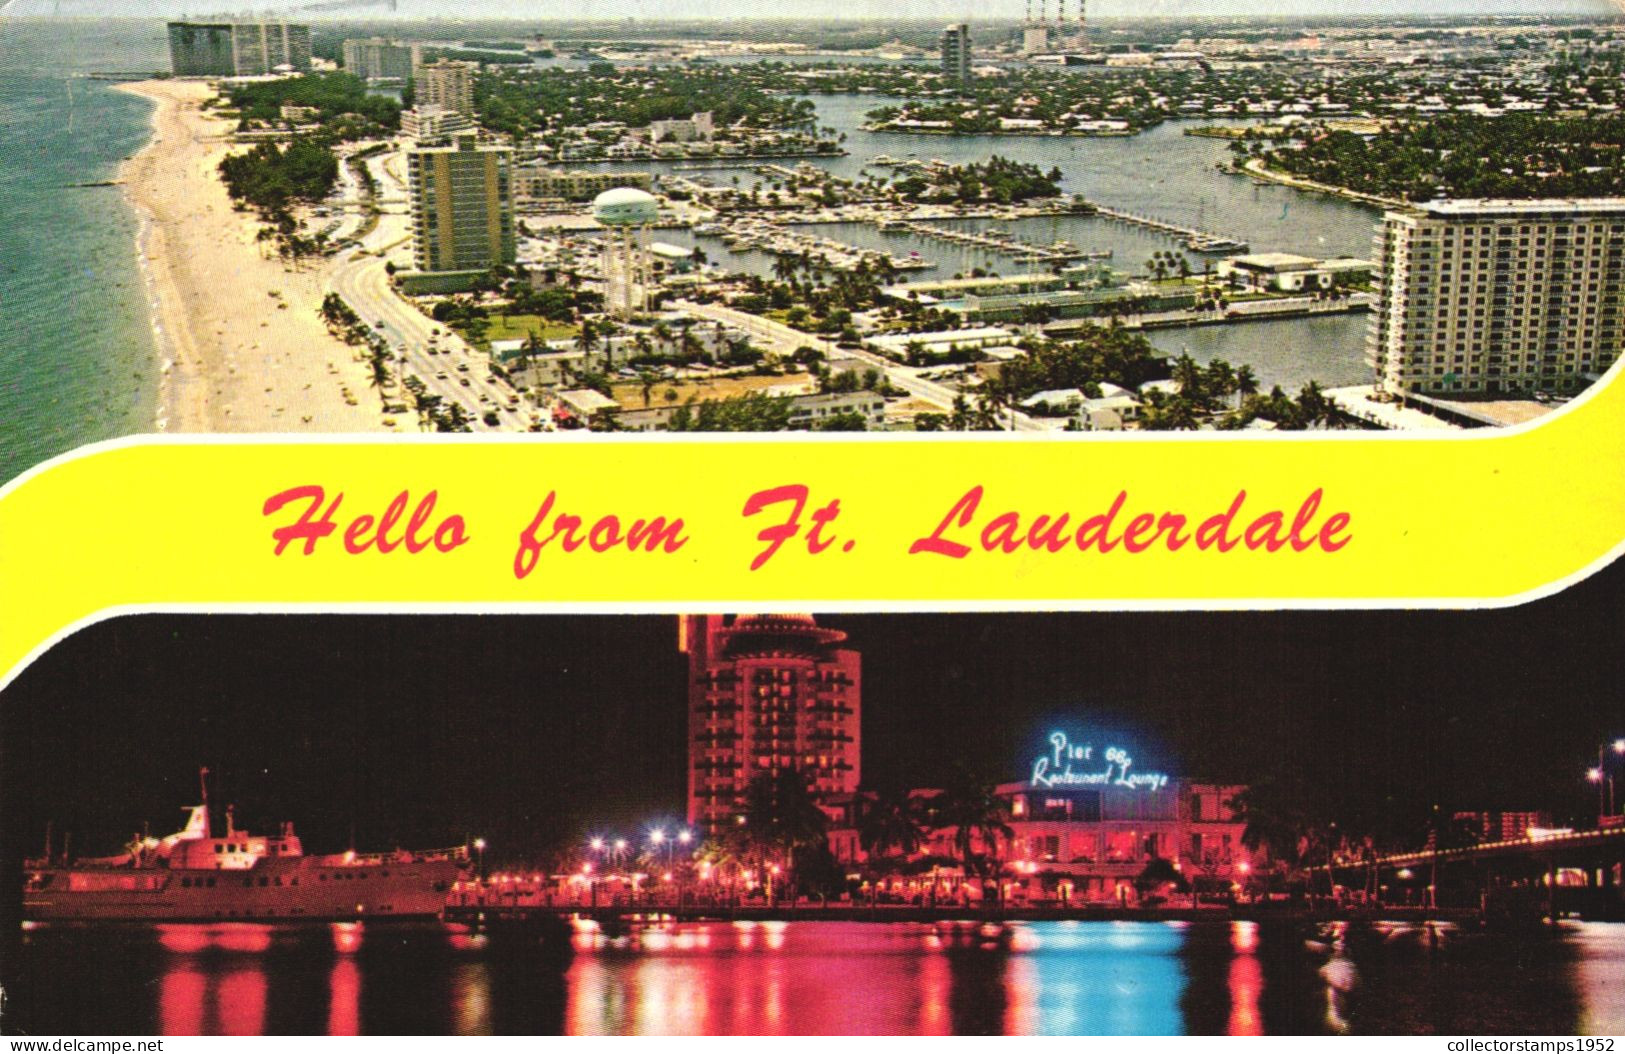 FORT LAUDERDALE, MULTIPLE VIEWS, ARCHITECTURE, BEACH, PORT, BOATS, SHIP, FLORIDA, UNITED STATES, POSTCARD - Fort Lauderdale